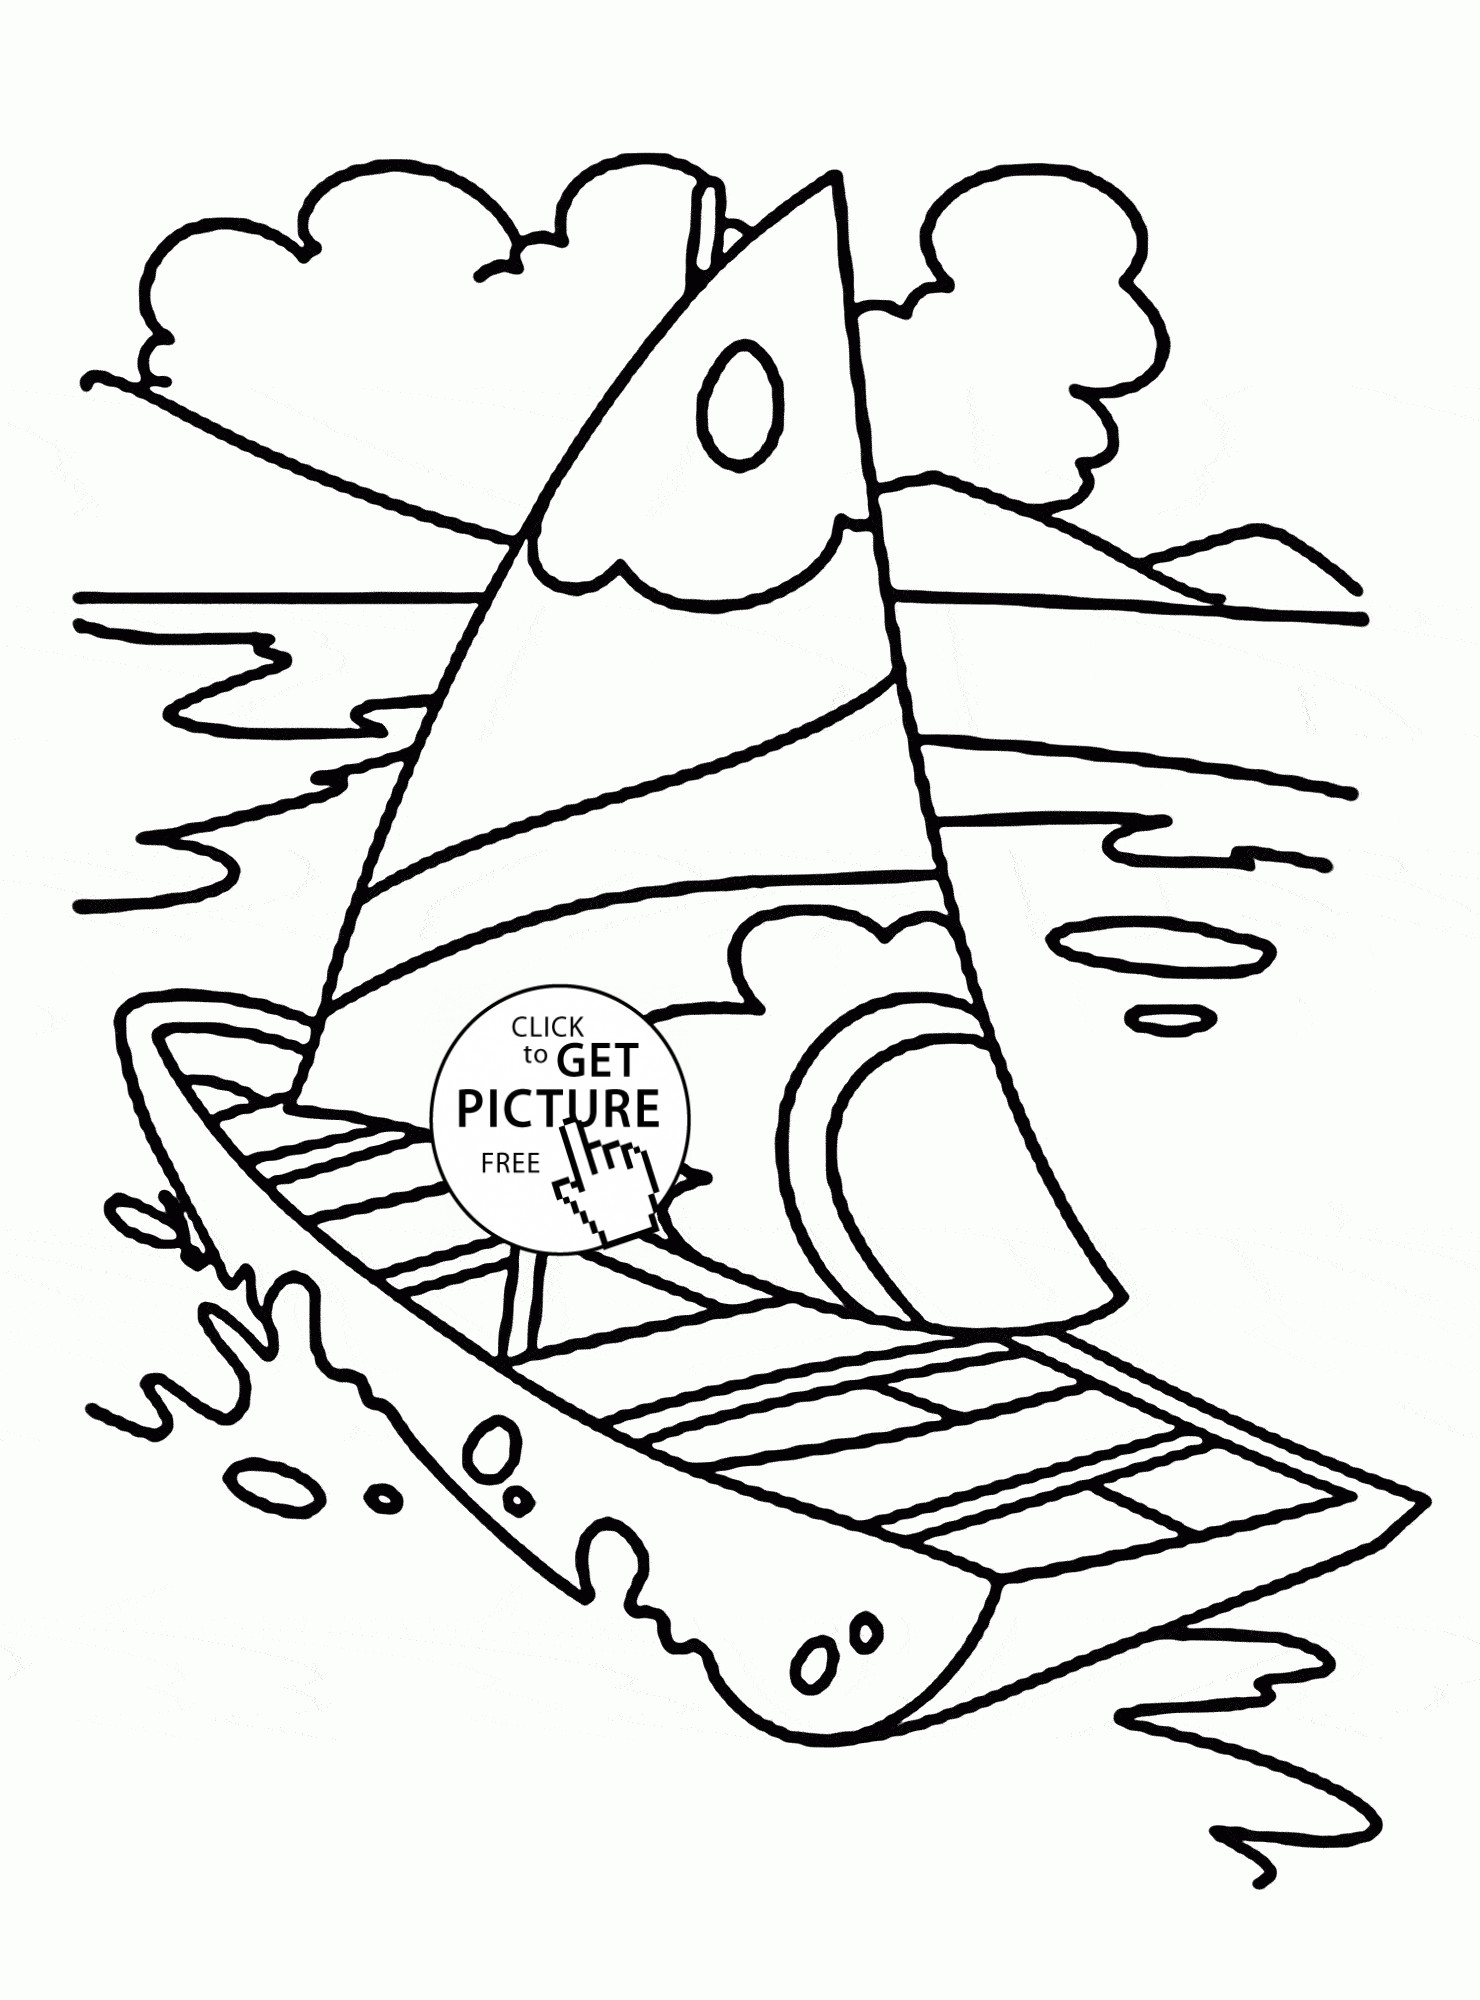 Boat Coloring Pages For Toddlers
 Beautiful Sailing Boat coloring page for kids